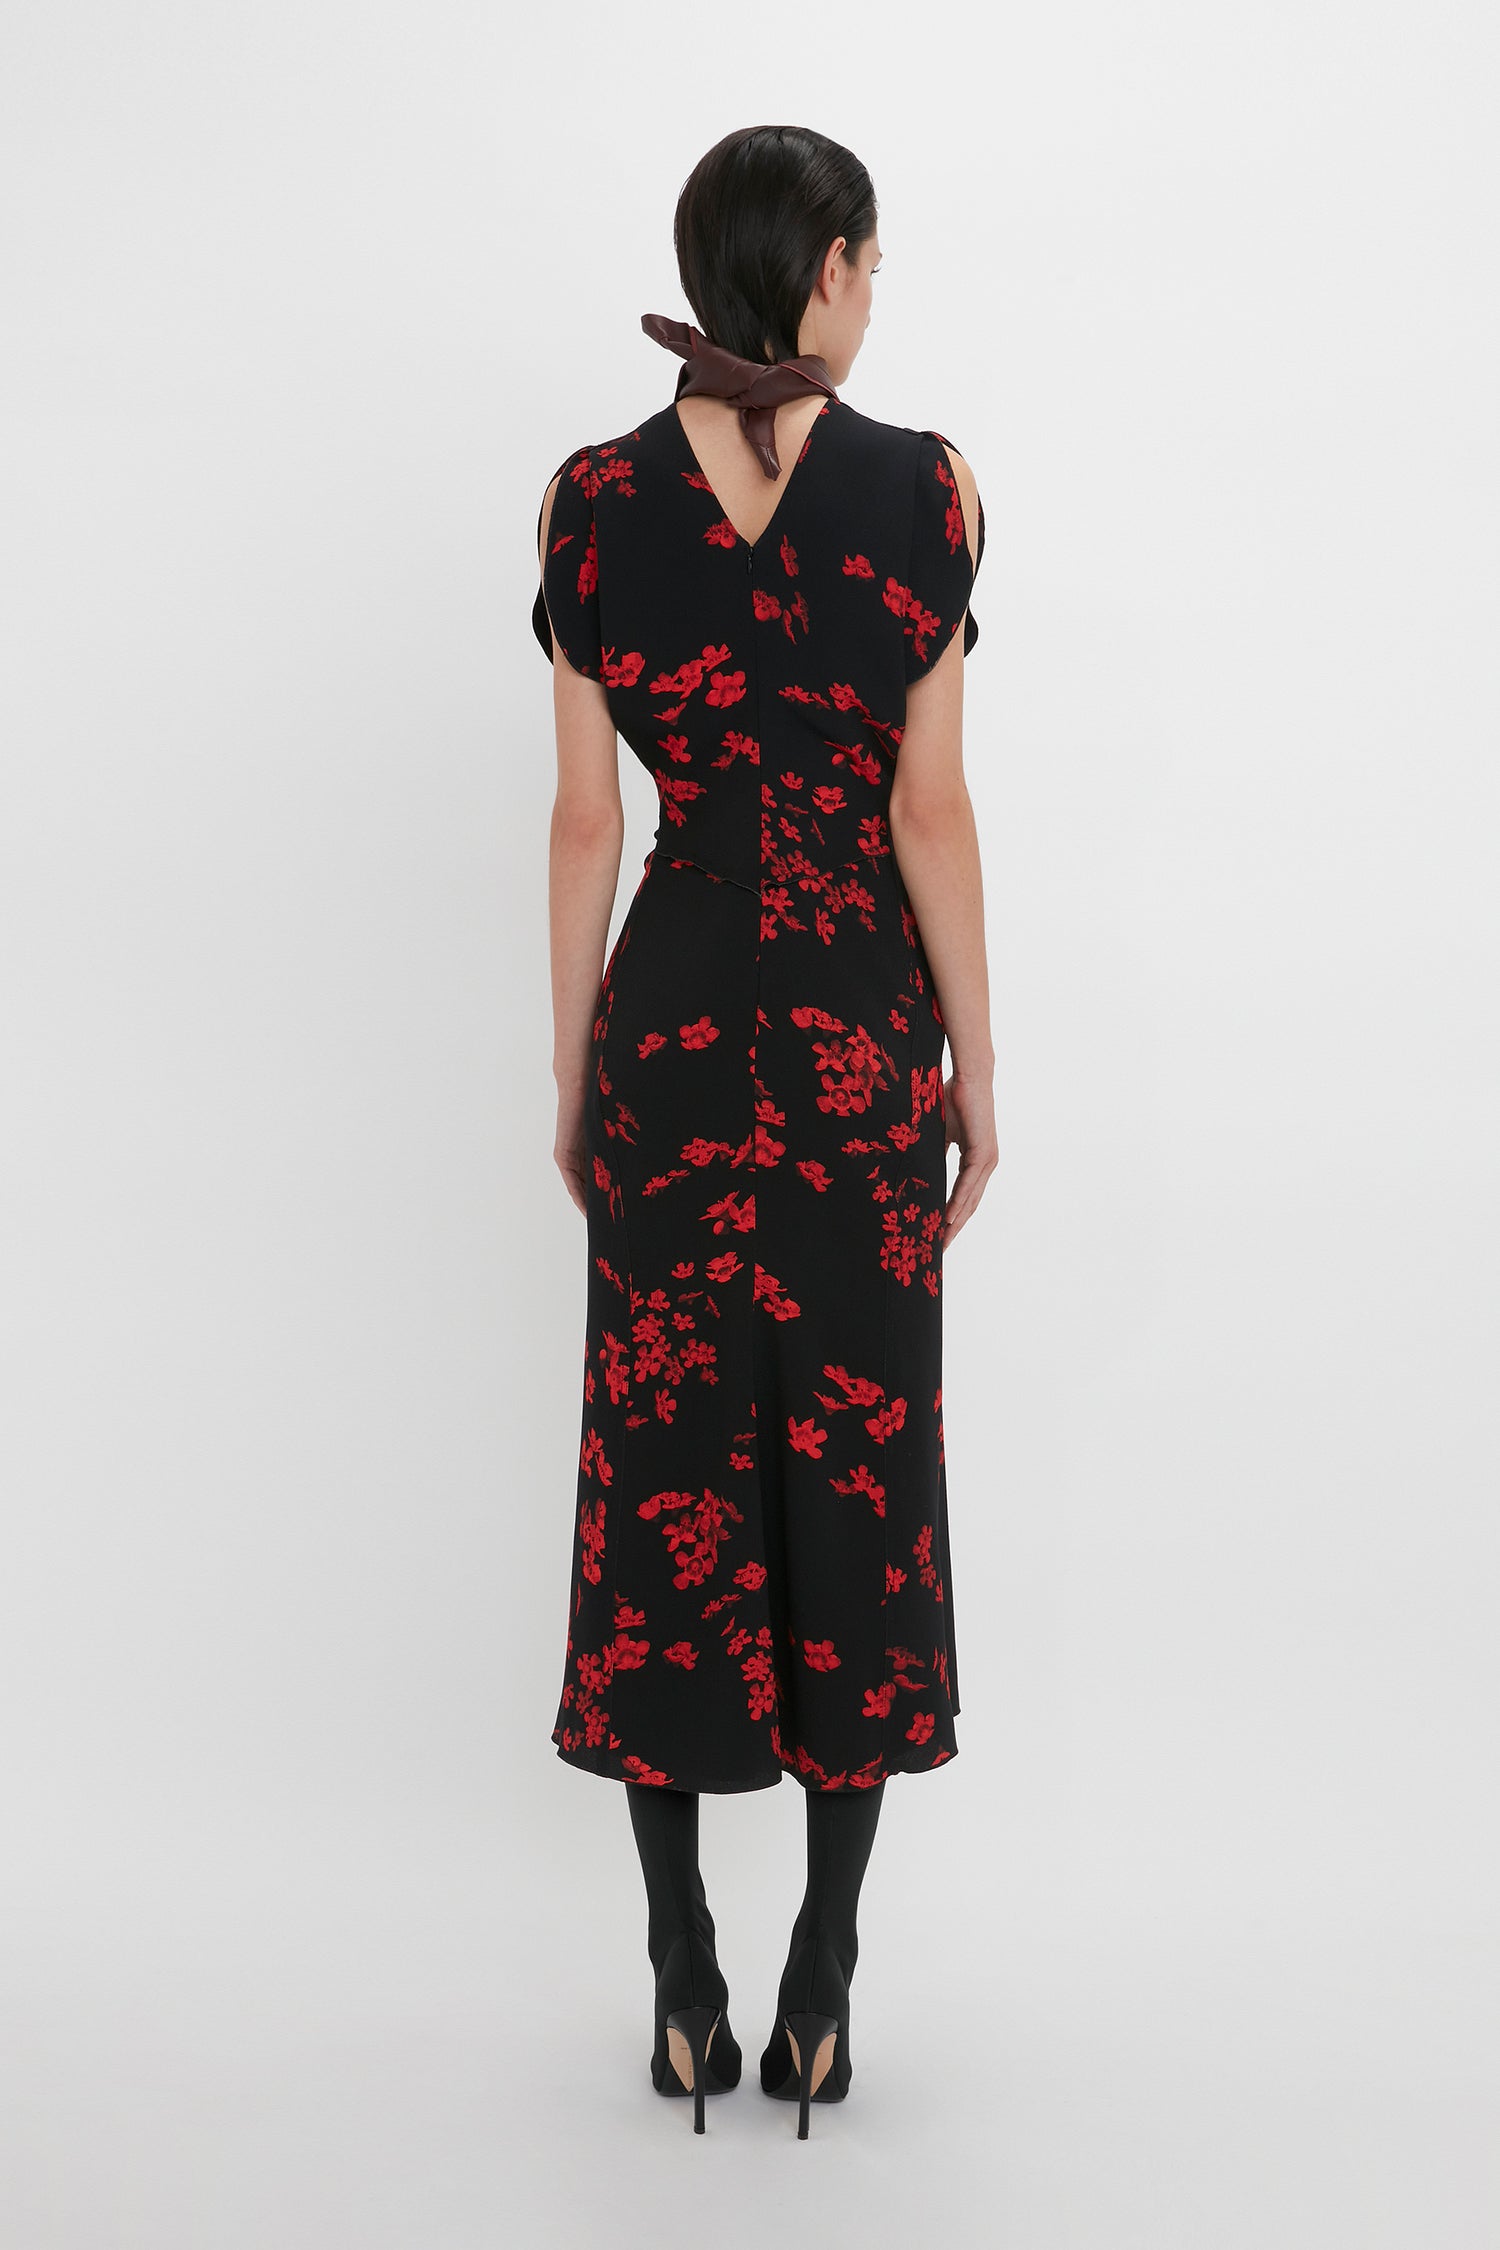 A person with dark hair in a ponytail is wearing a Gathered Waist Midi Dress In Sci-Fi Black Floral by Victoria Beckham featuring red floral patterns and a fit-and-flare silhouette, paired with black tights and high heels, standing with their back facing the camera against a plain white background.